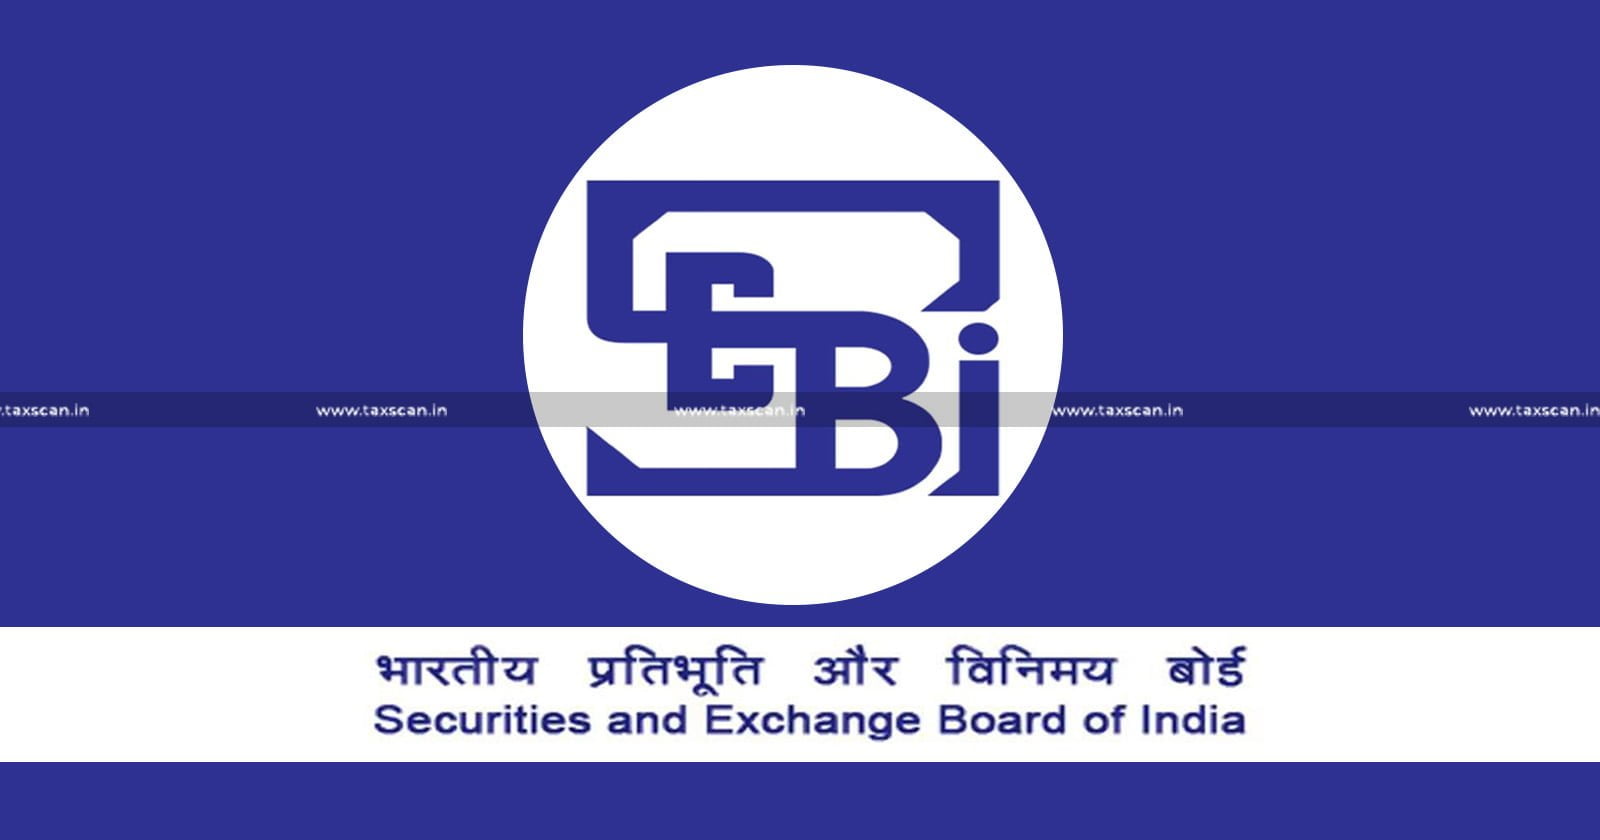 Allegation of Price Manipulation on Purchase and Sale of Shares on Stock Exchange through SEBI - ITAT- Disallowance of Exemption of LCG - TAXSCAN